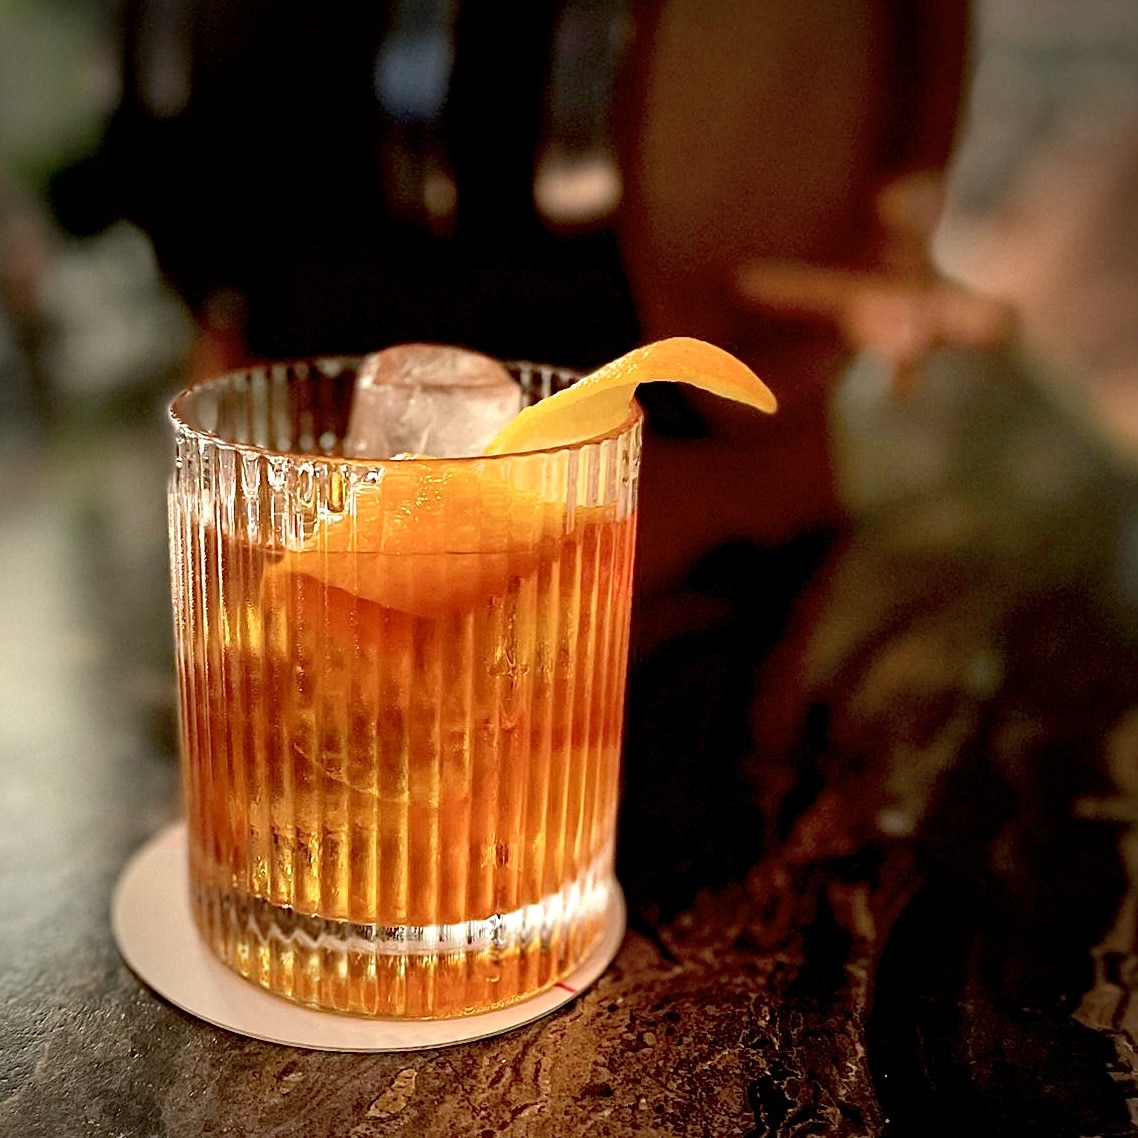 ribbed Rocks glass filled with glass and whiskey old fashioned with orange peel garnish on dark marble bar.